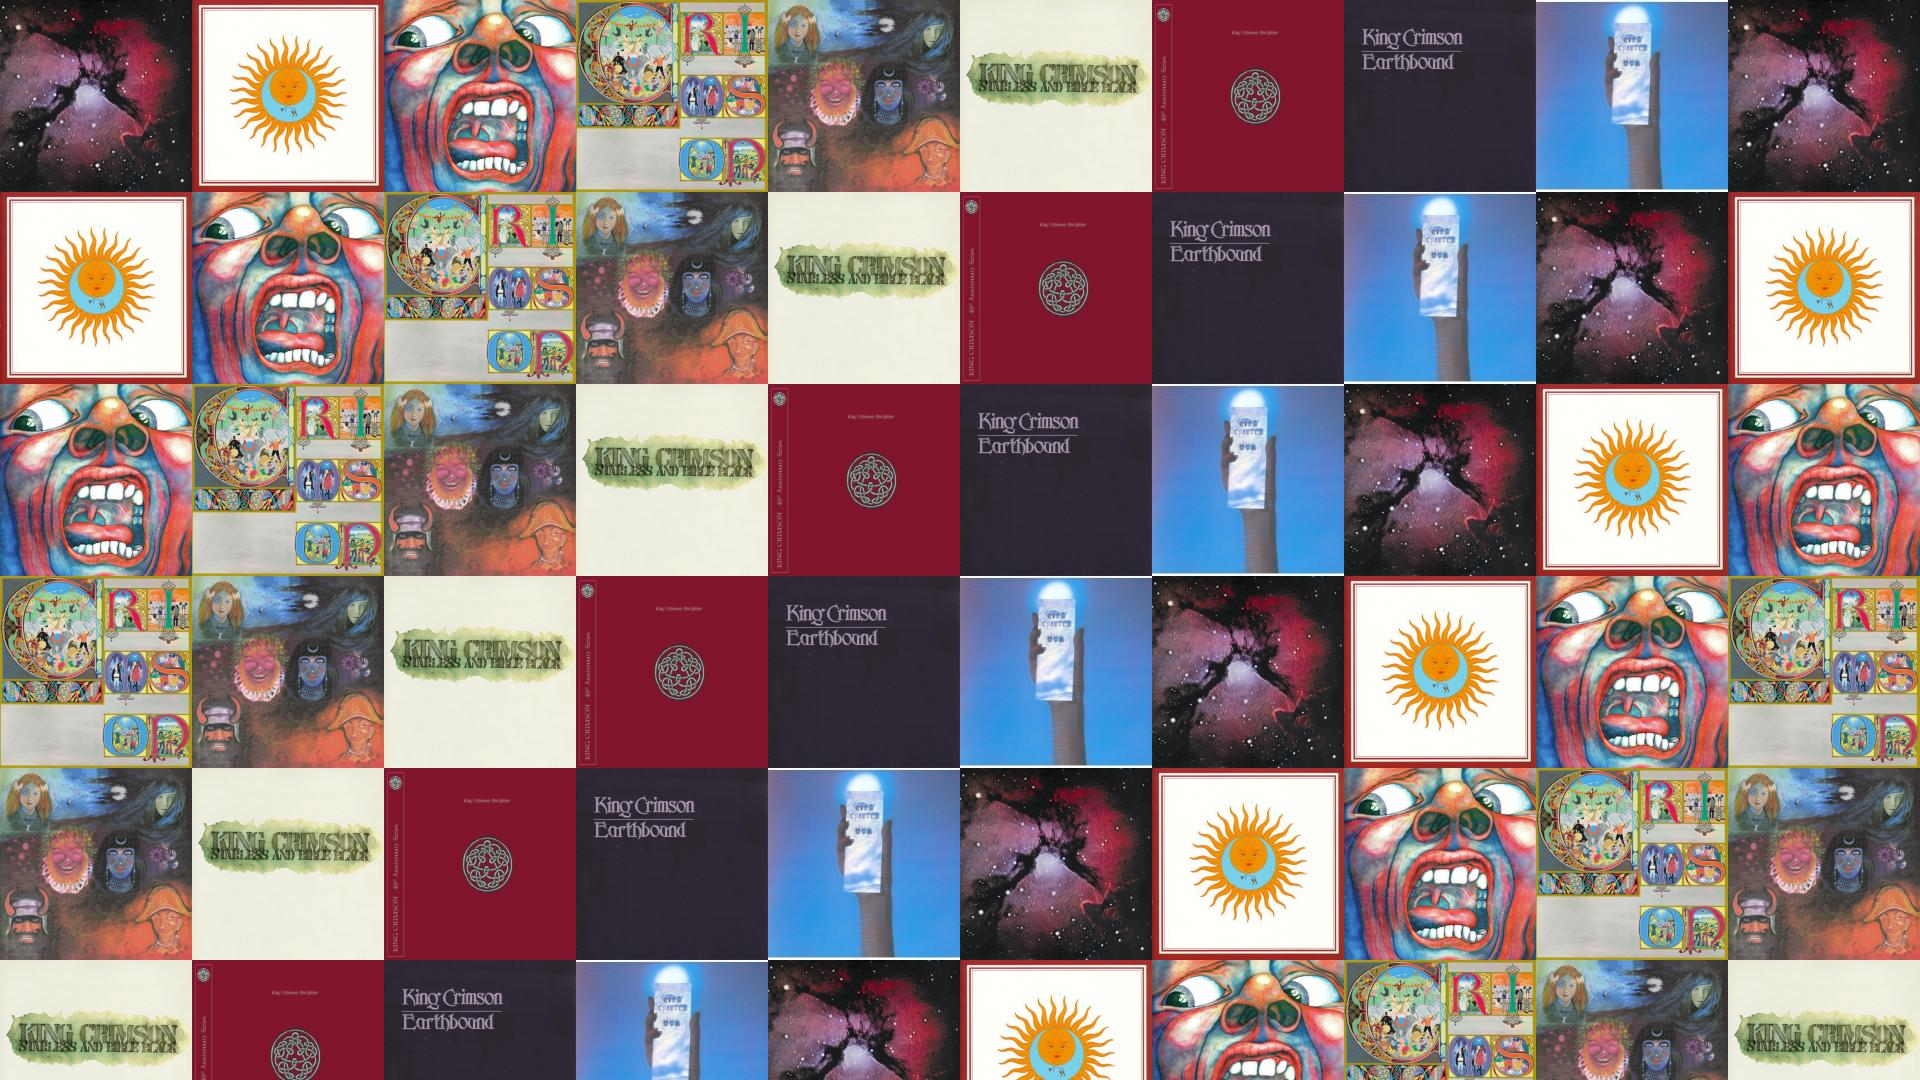 Wallpapers King Crimson Islands Larks Tongues In Aspic 1920x1080 ...